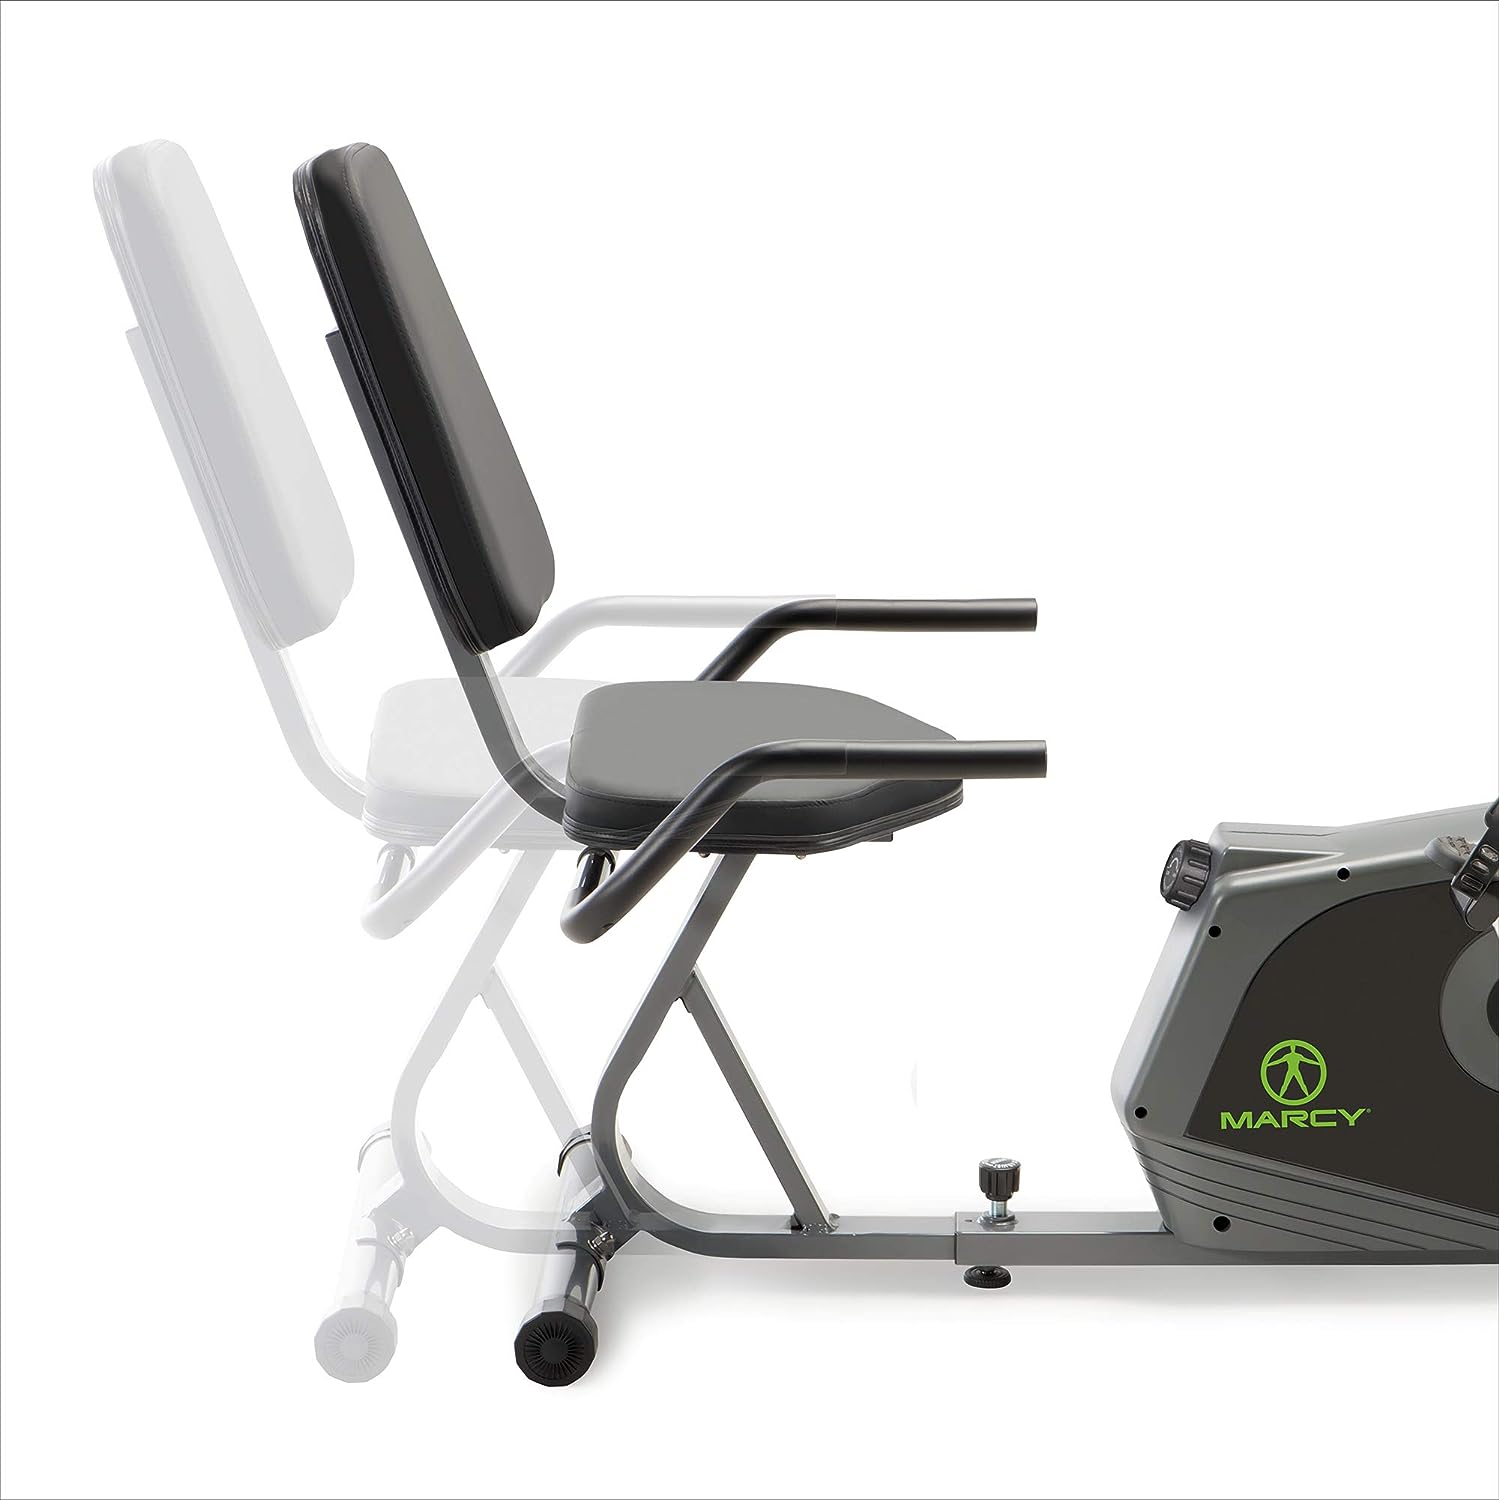 Marcy Magnetic Recumbent Exercise Bike For Home and Home Gym, With Digital Monitor And Quick Adjustable Seat NS-1206R